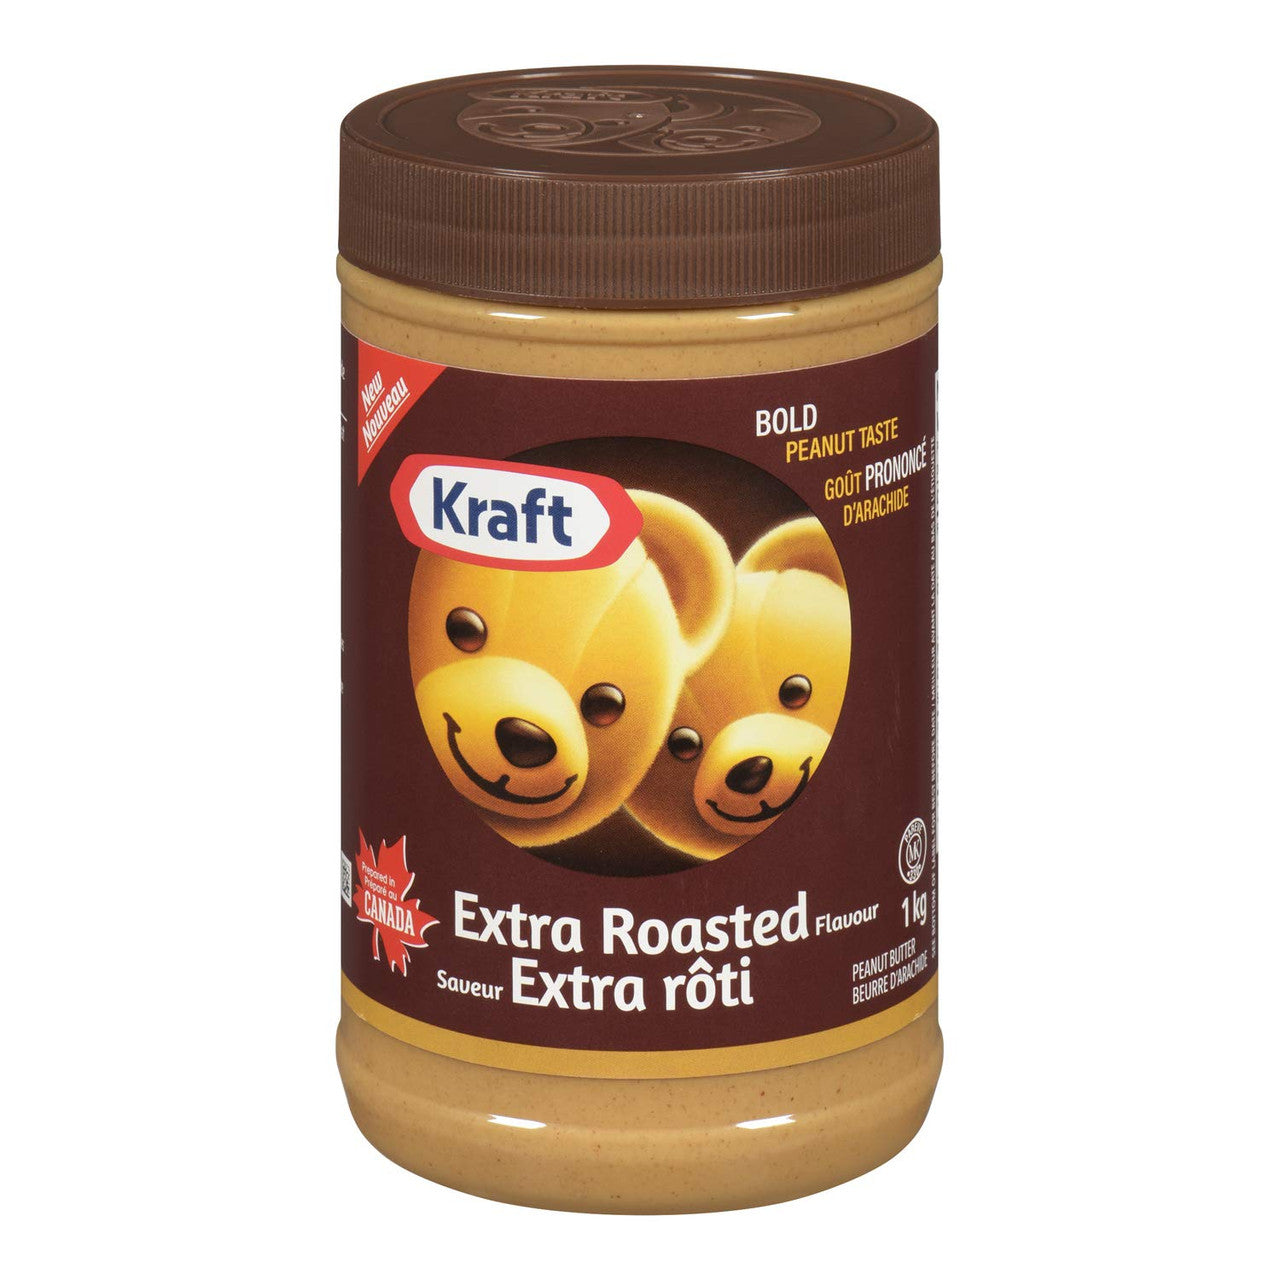 Kraft Extra Roasted Peanut Butter, 1Kg/2.2 lbs., (Pack of 12), {Imported from Canada}